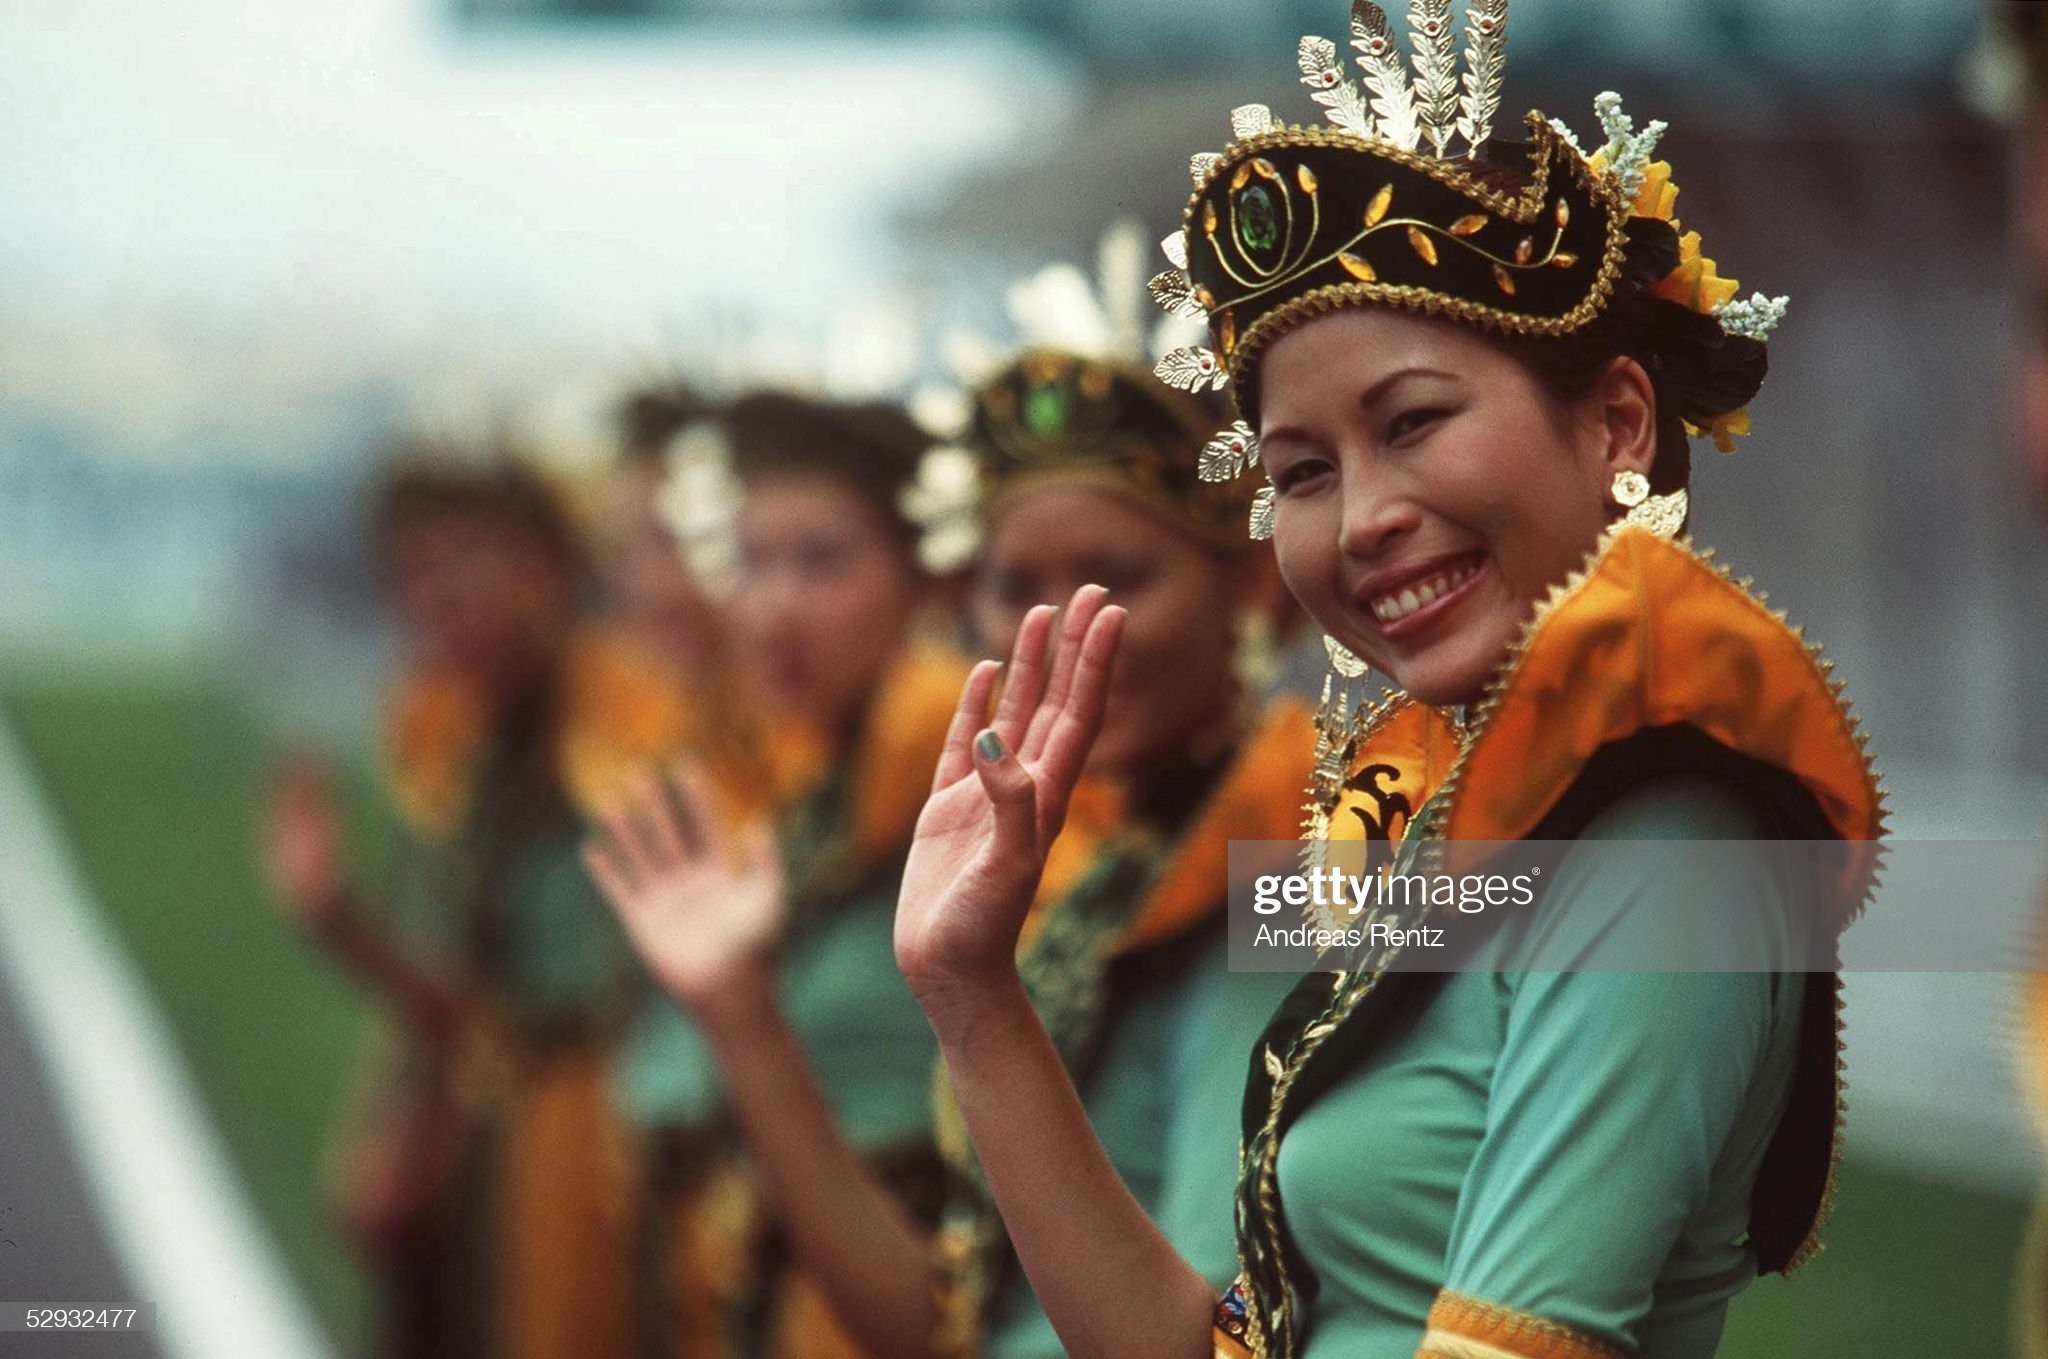 Malaysian girls in traditional costume at Sepang on October 17, 1999. 